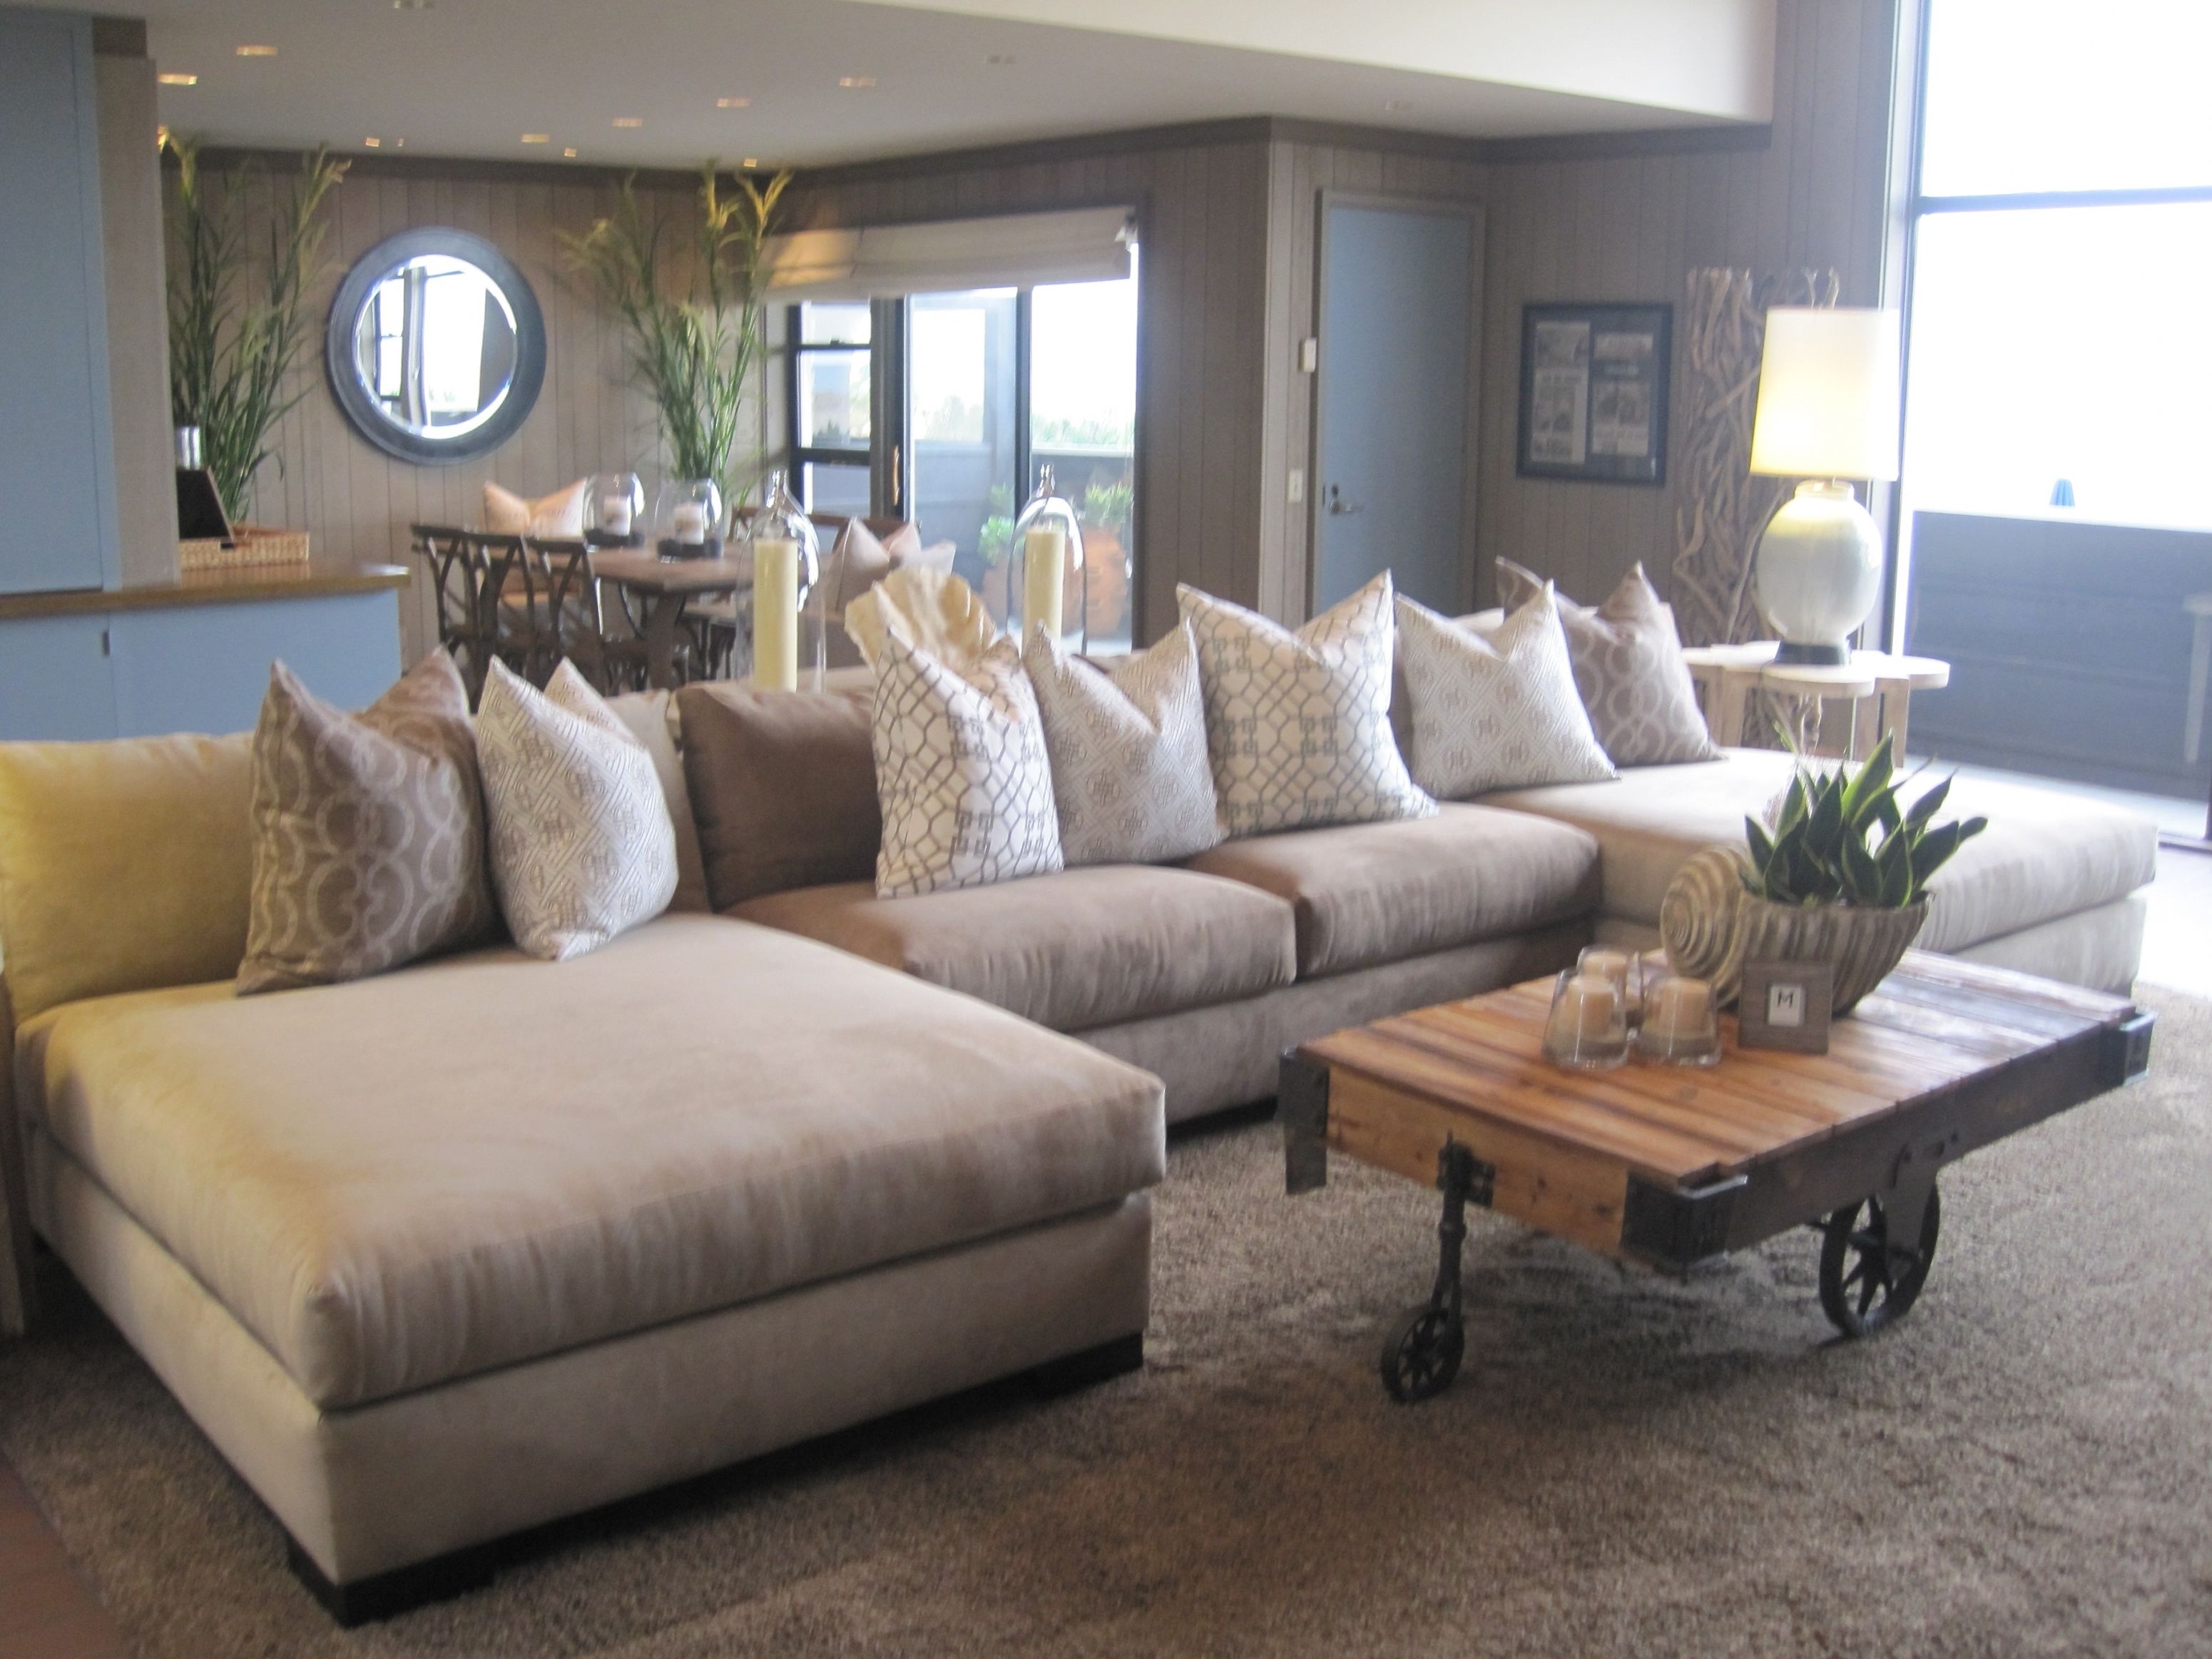 chaise lounge in living room ideas